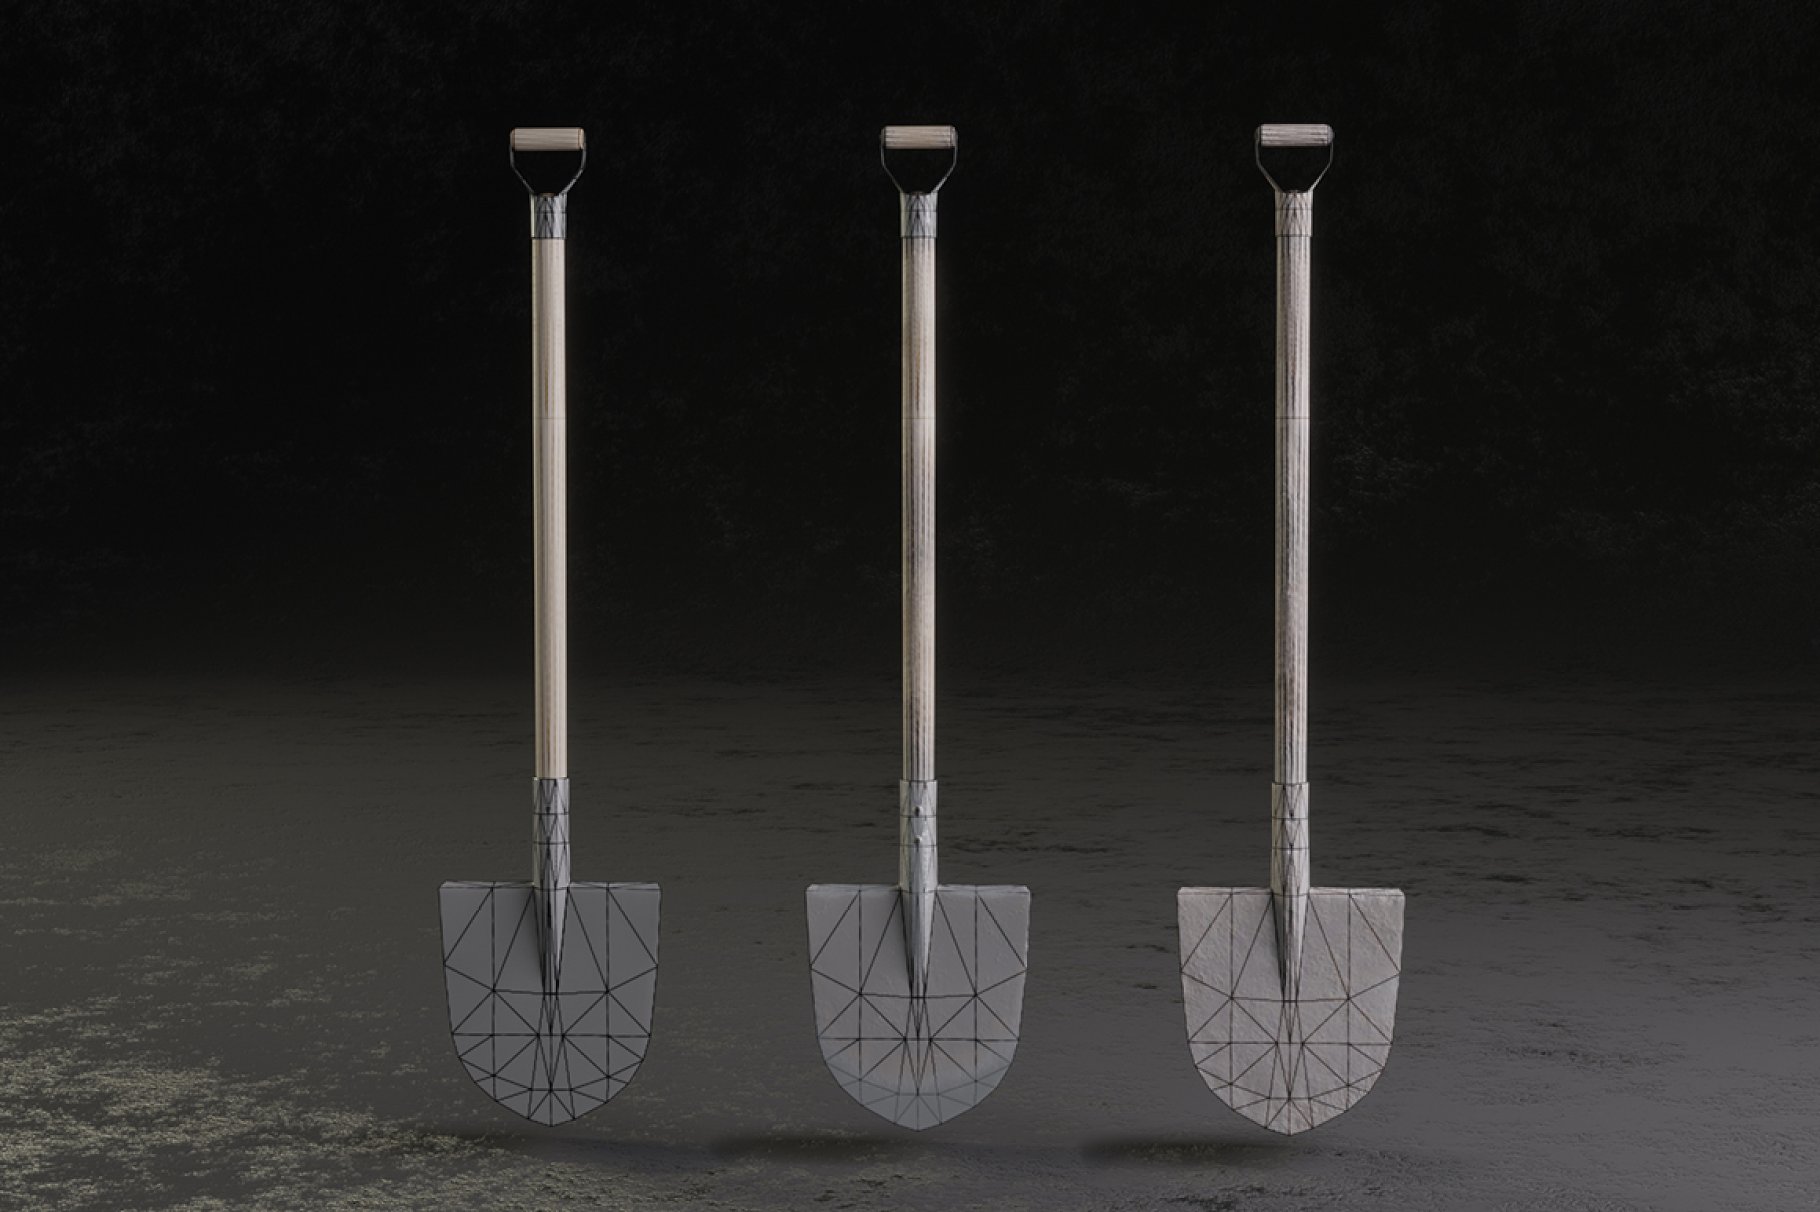 3 gray pointed shovels with handles.